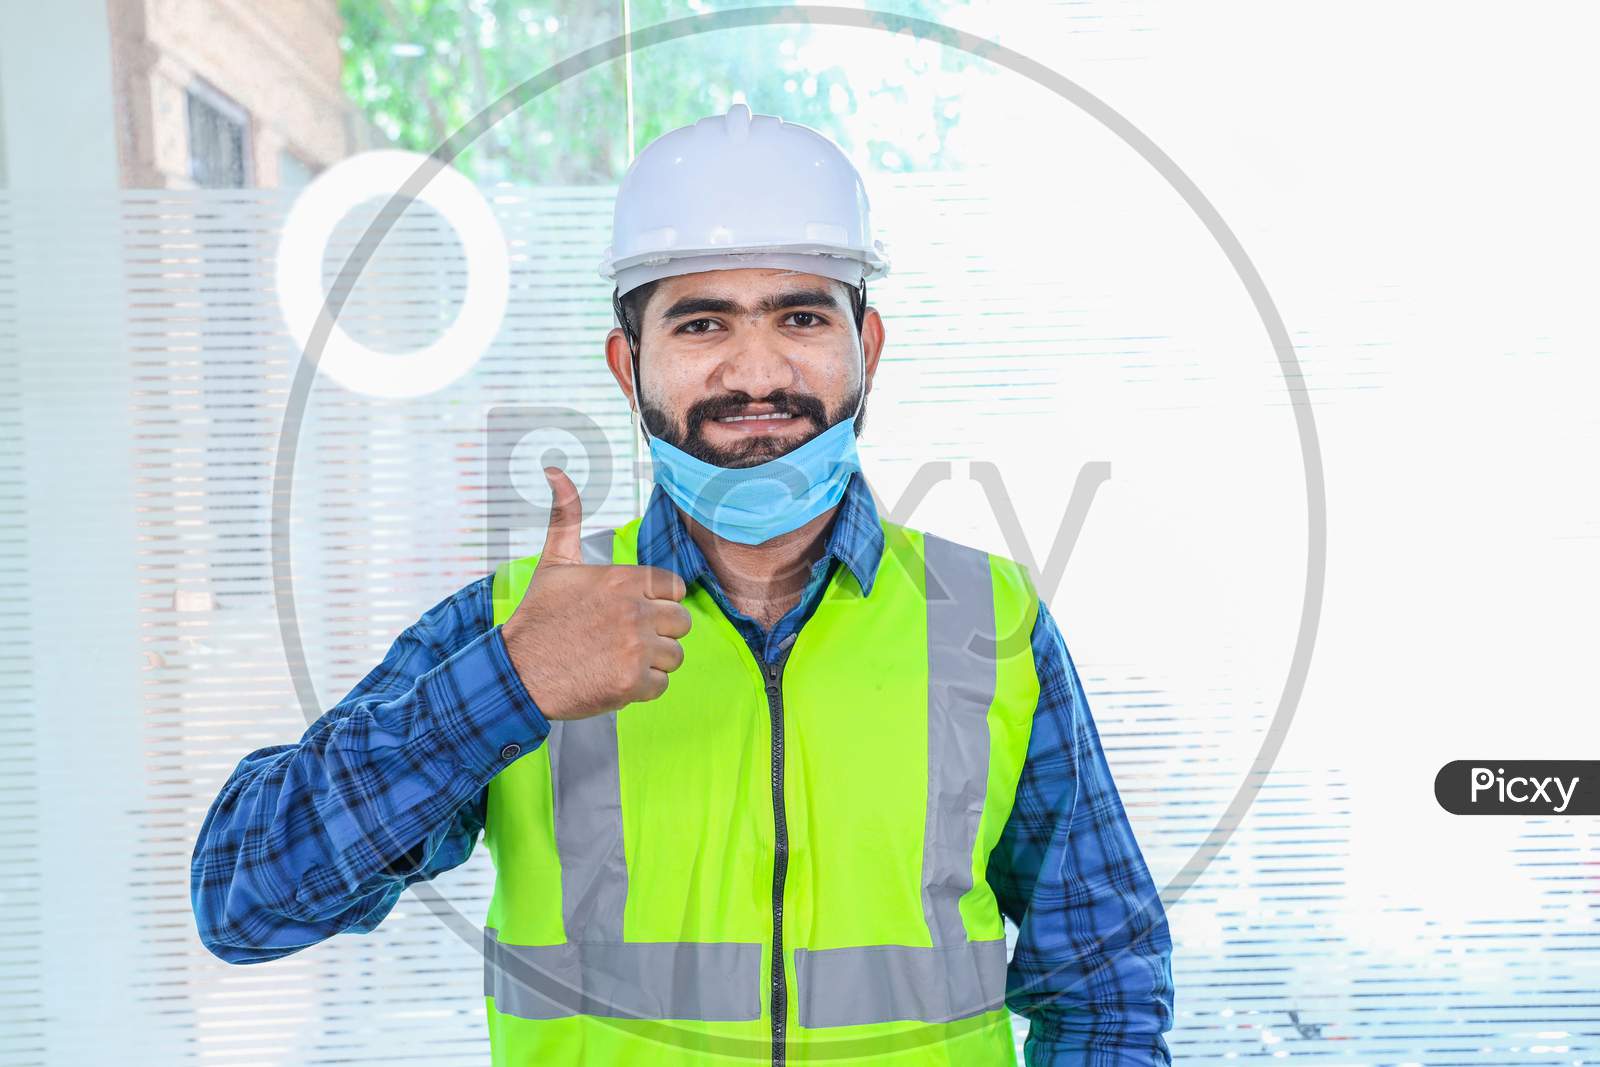 Young Engineer Wearing Take Off Mask Thumbs Up Gesture With Hand, Approving Expression, Man Wearing Blue Shirt With Yellow Vest And White Helmet, Back To Work After Lockdown Ends Due To Covid-19